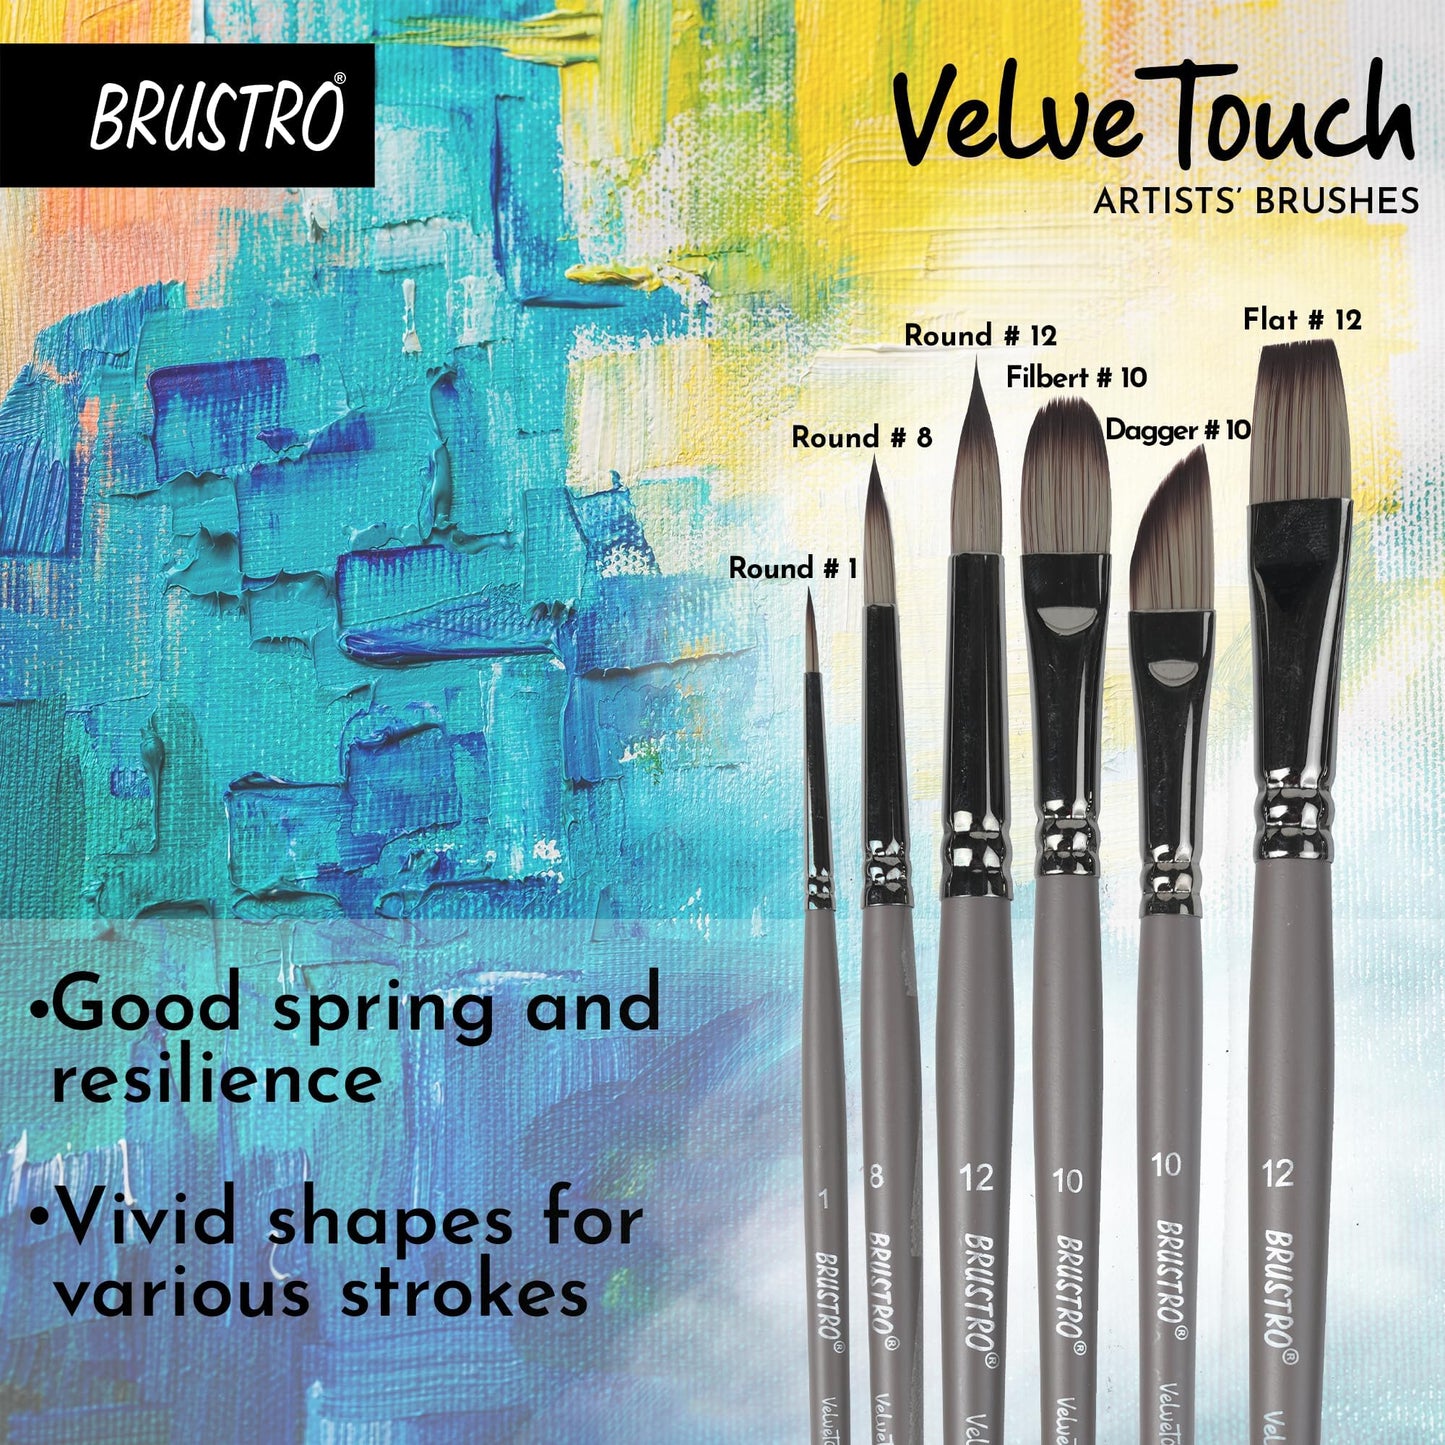 BRUSTRO Artists Gouache Colour Set of 24 Colours X 12ML Tubes with 25% Cotton Watercolour Wiro Journal Cold Pressed 200 GSM A5-25 Sheets and VelveTouch Artist Brushes set of 6